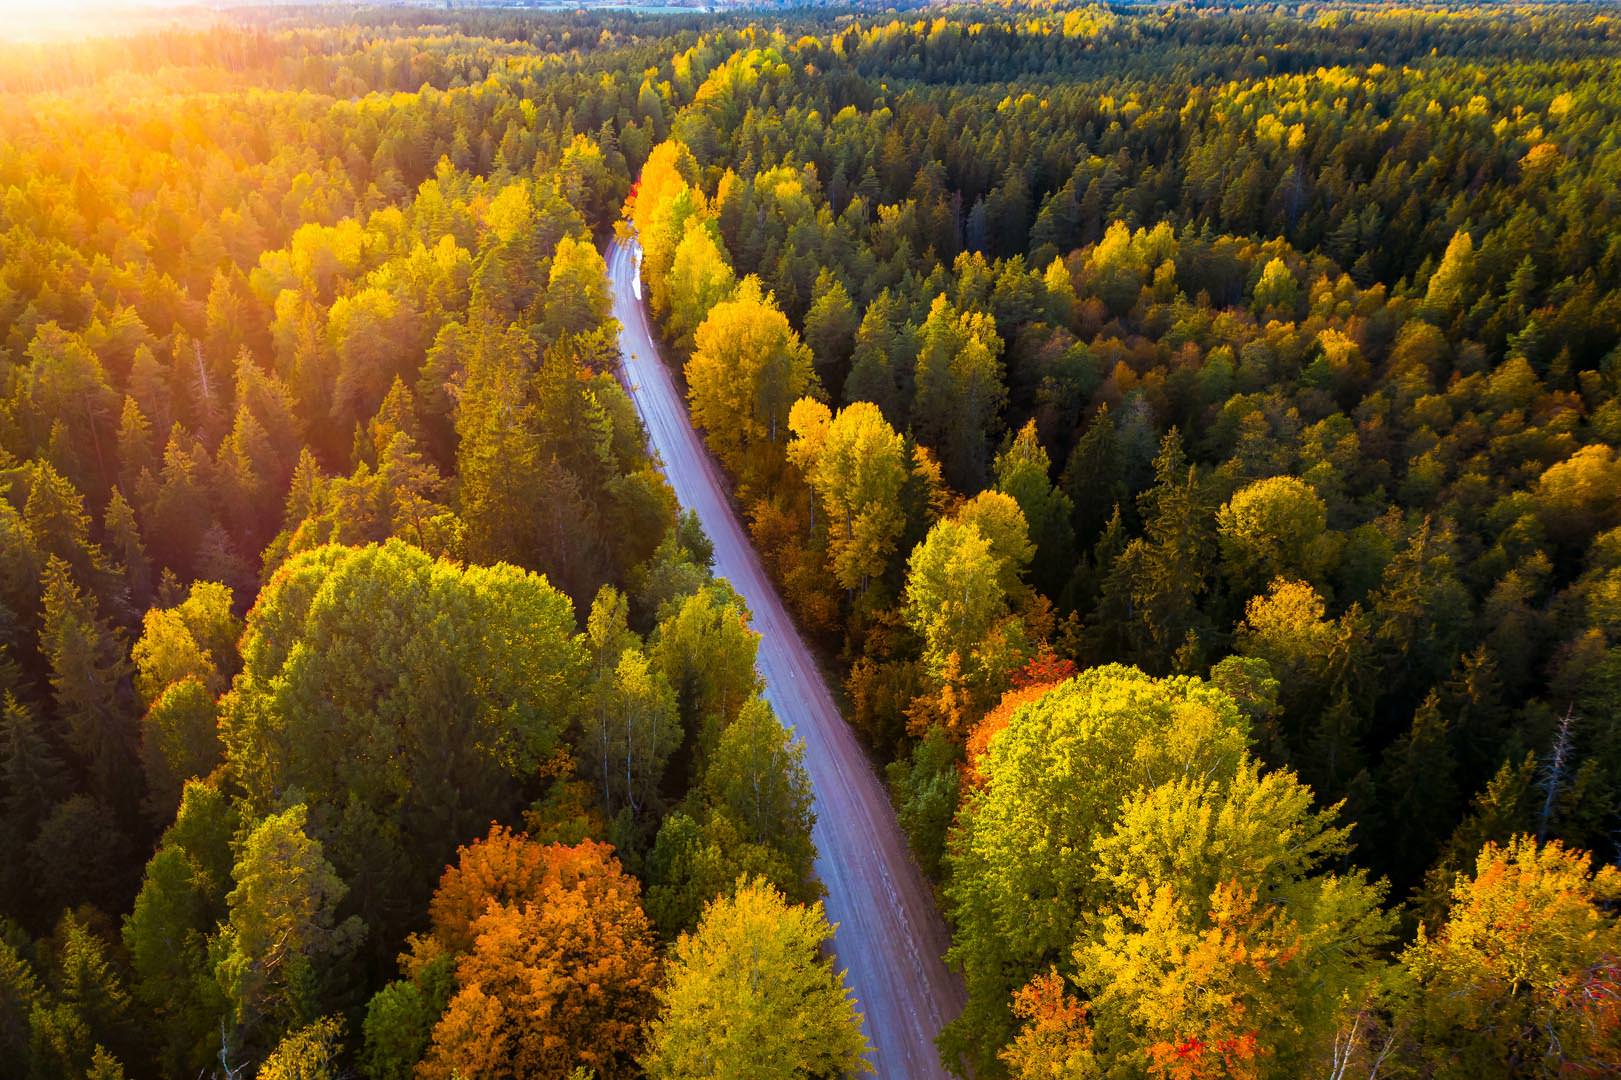 Trees in autumn colors. View of forest and road from above. Latvian nature.